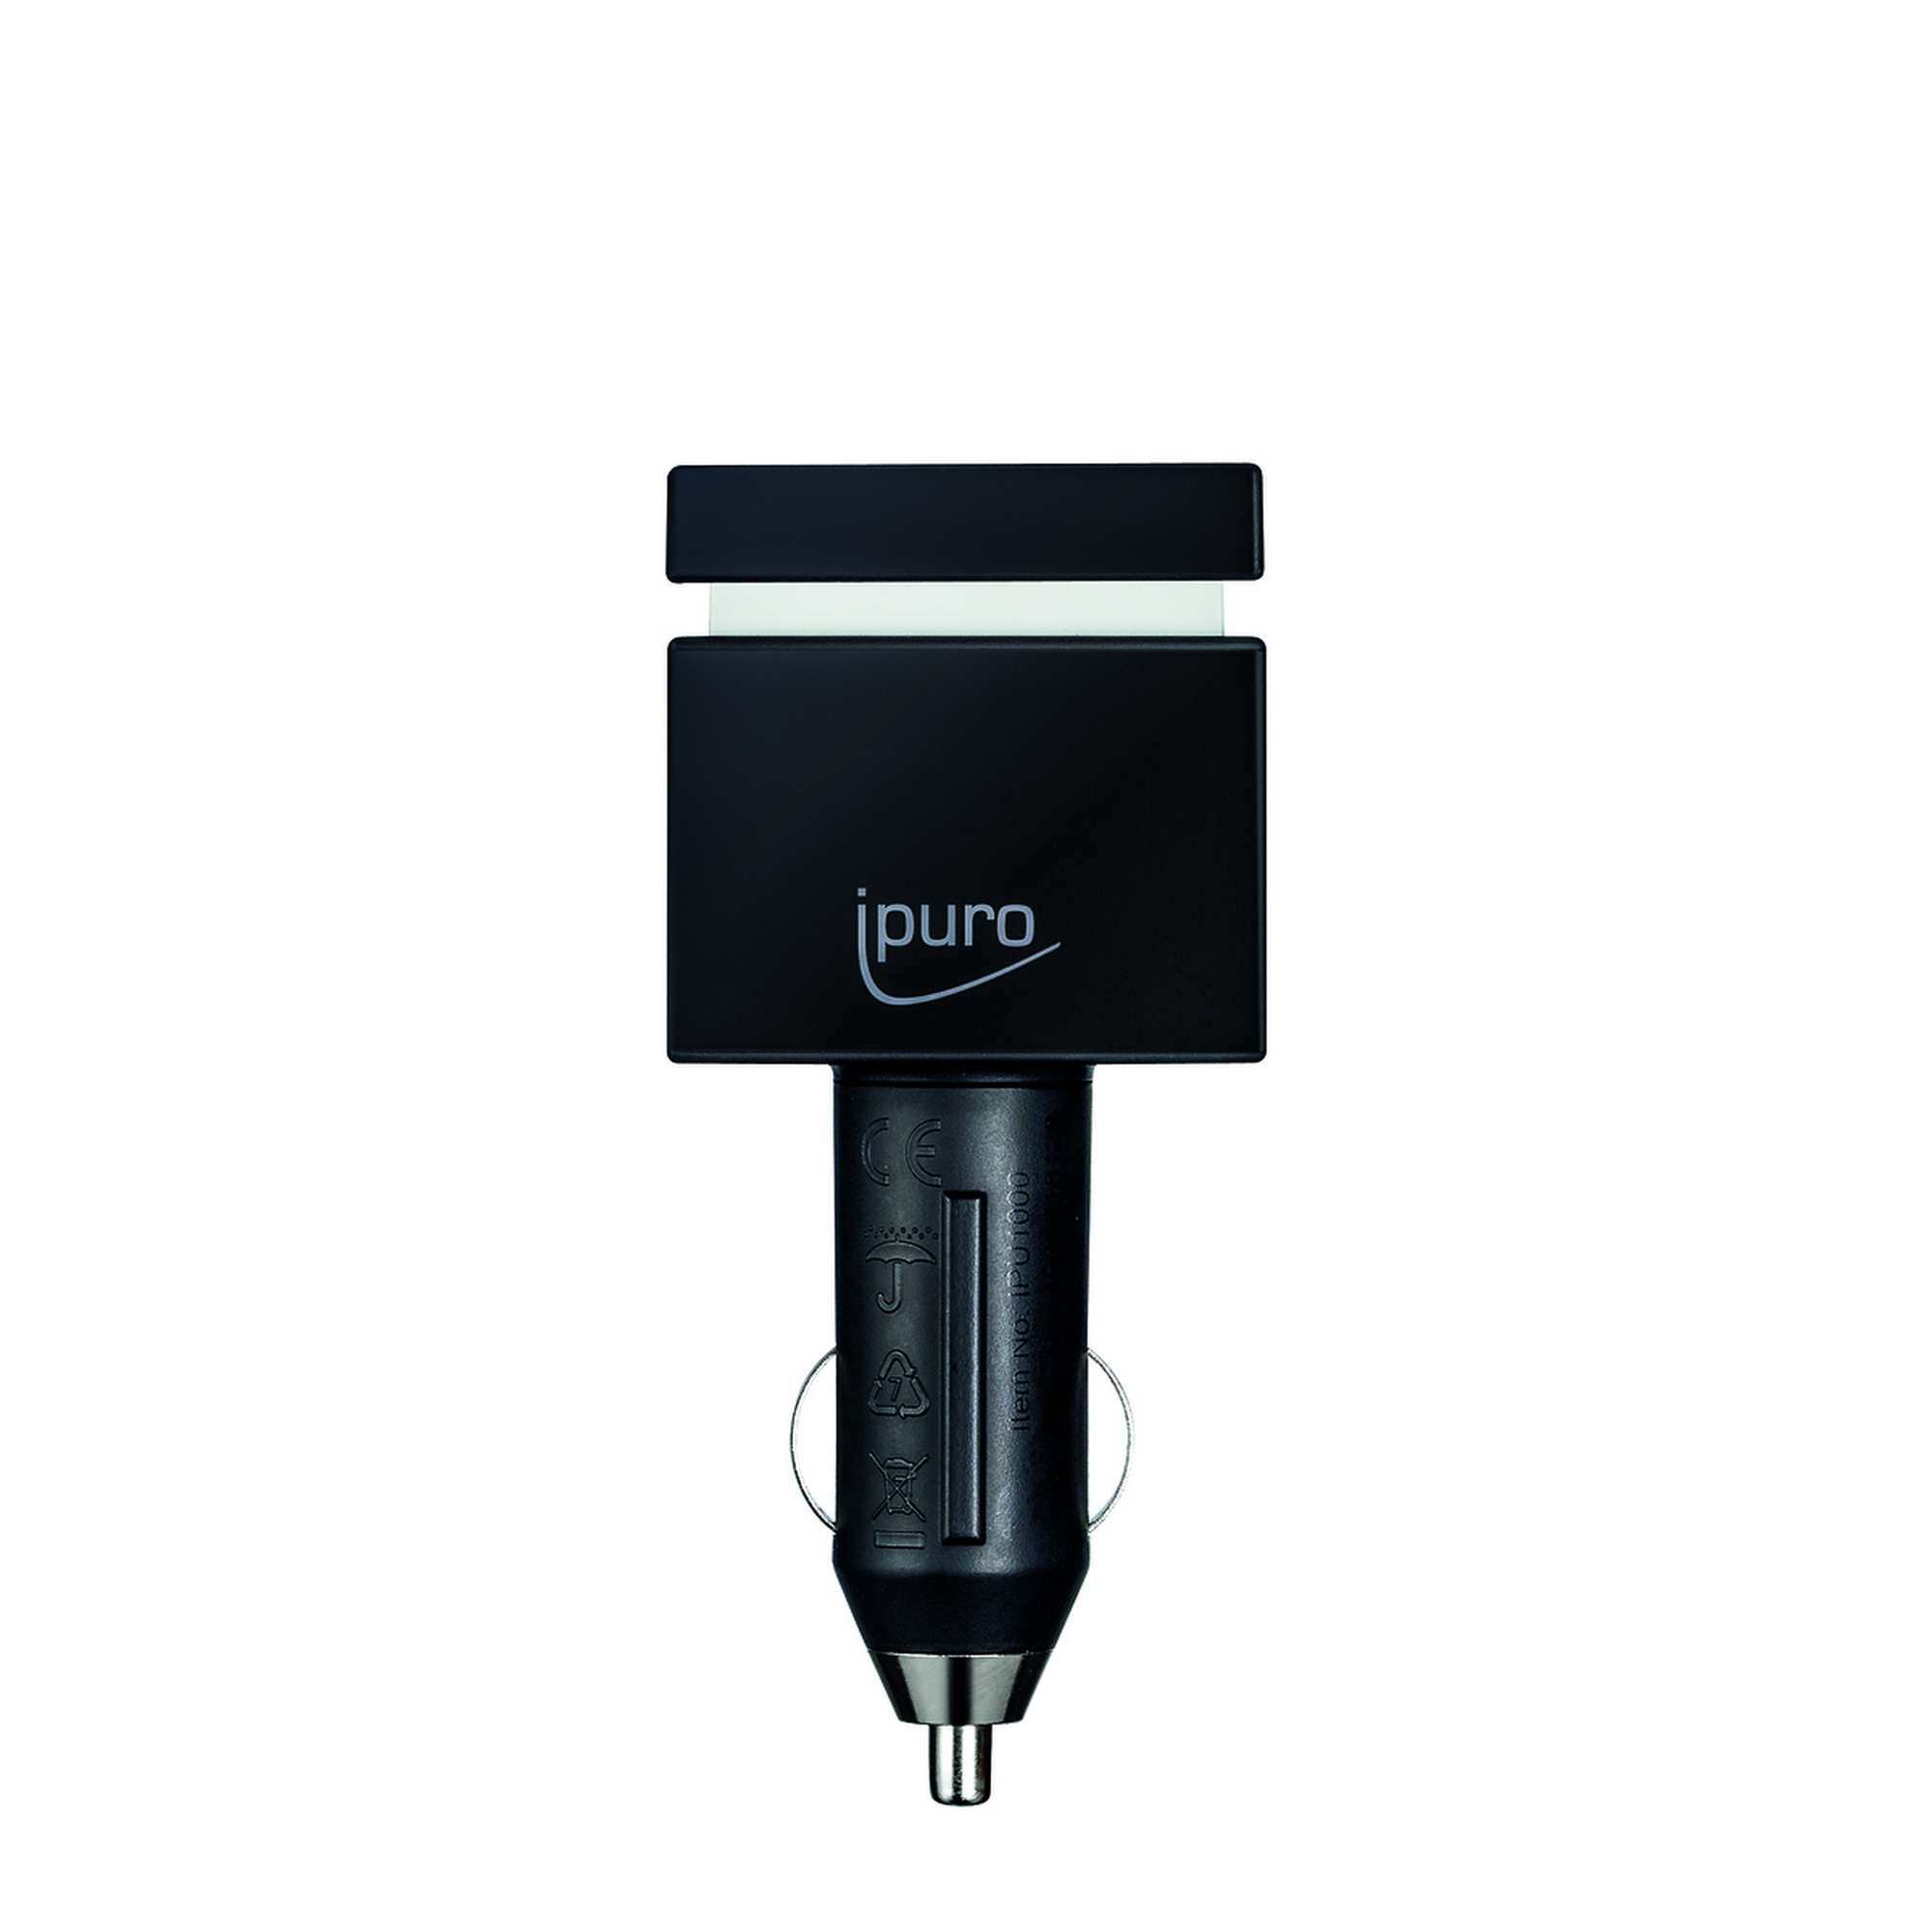 ipuro Air Pearls Electric Car Cube + product picture